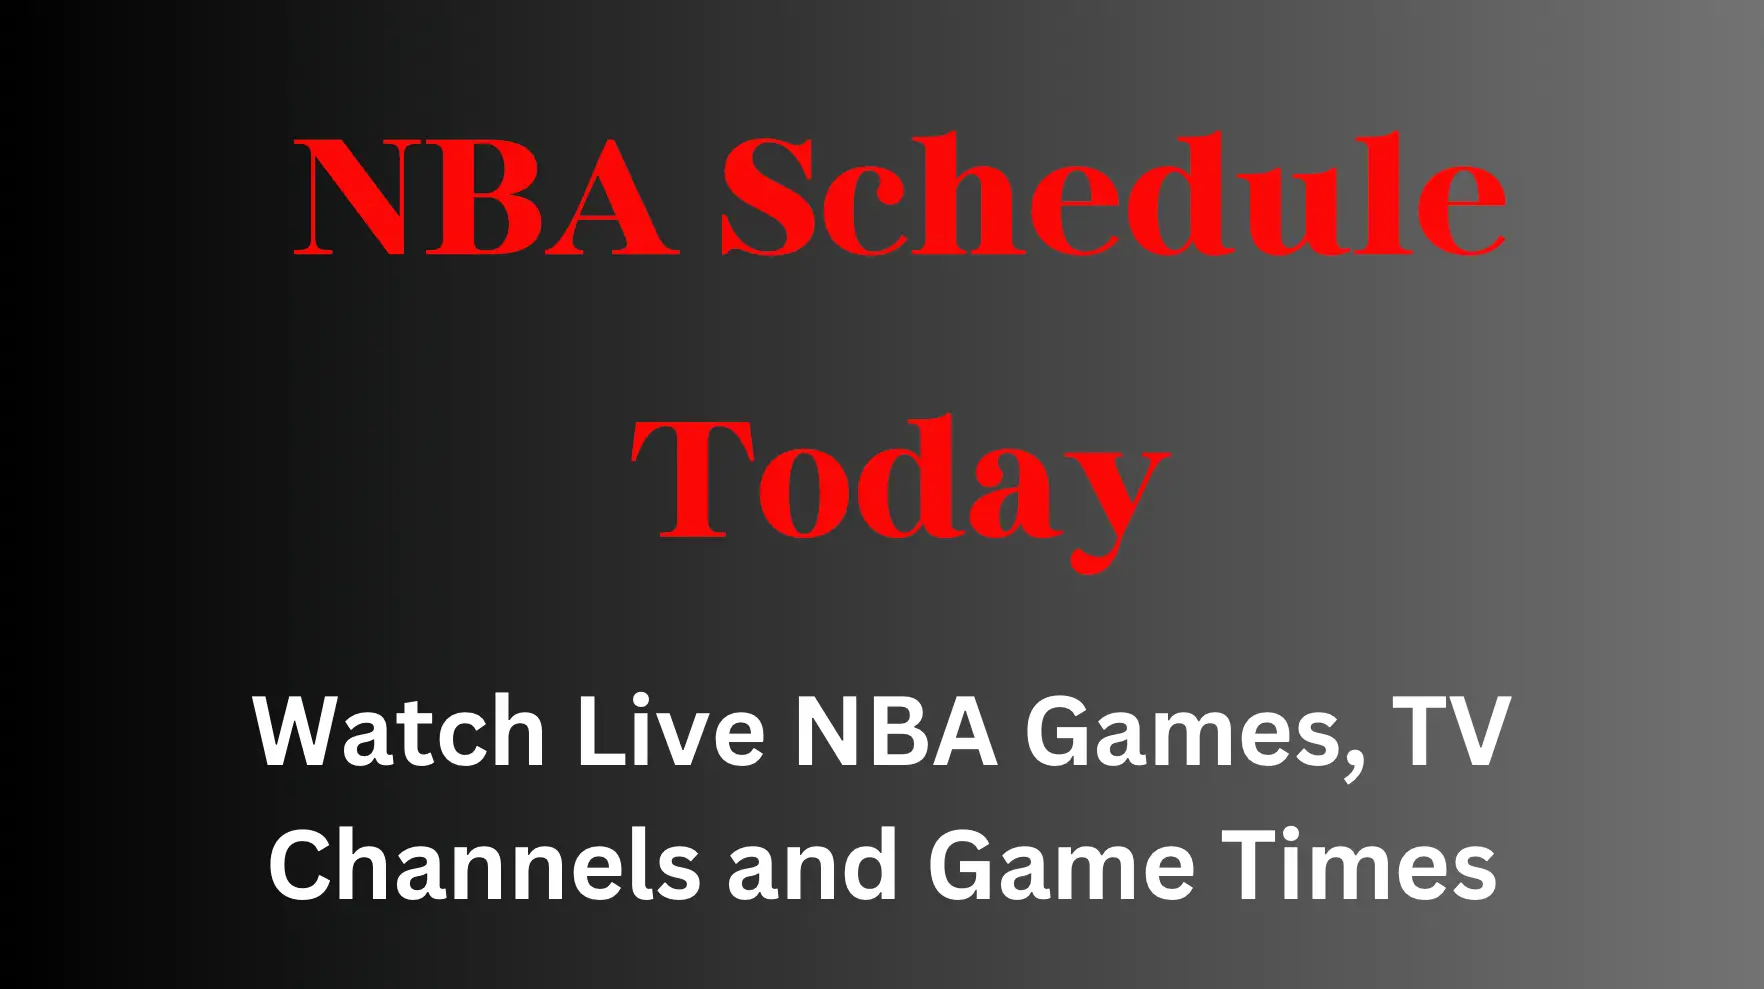 NBA schedule tonight (Oct.27) live game times, TV channels